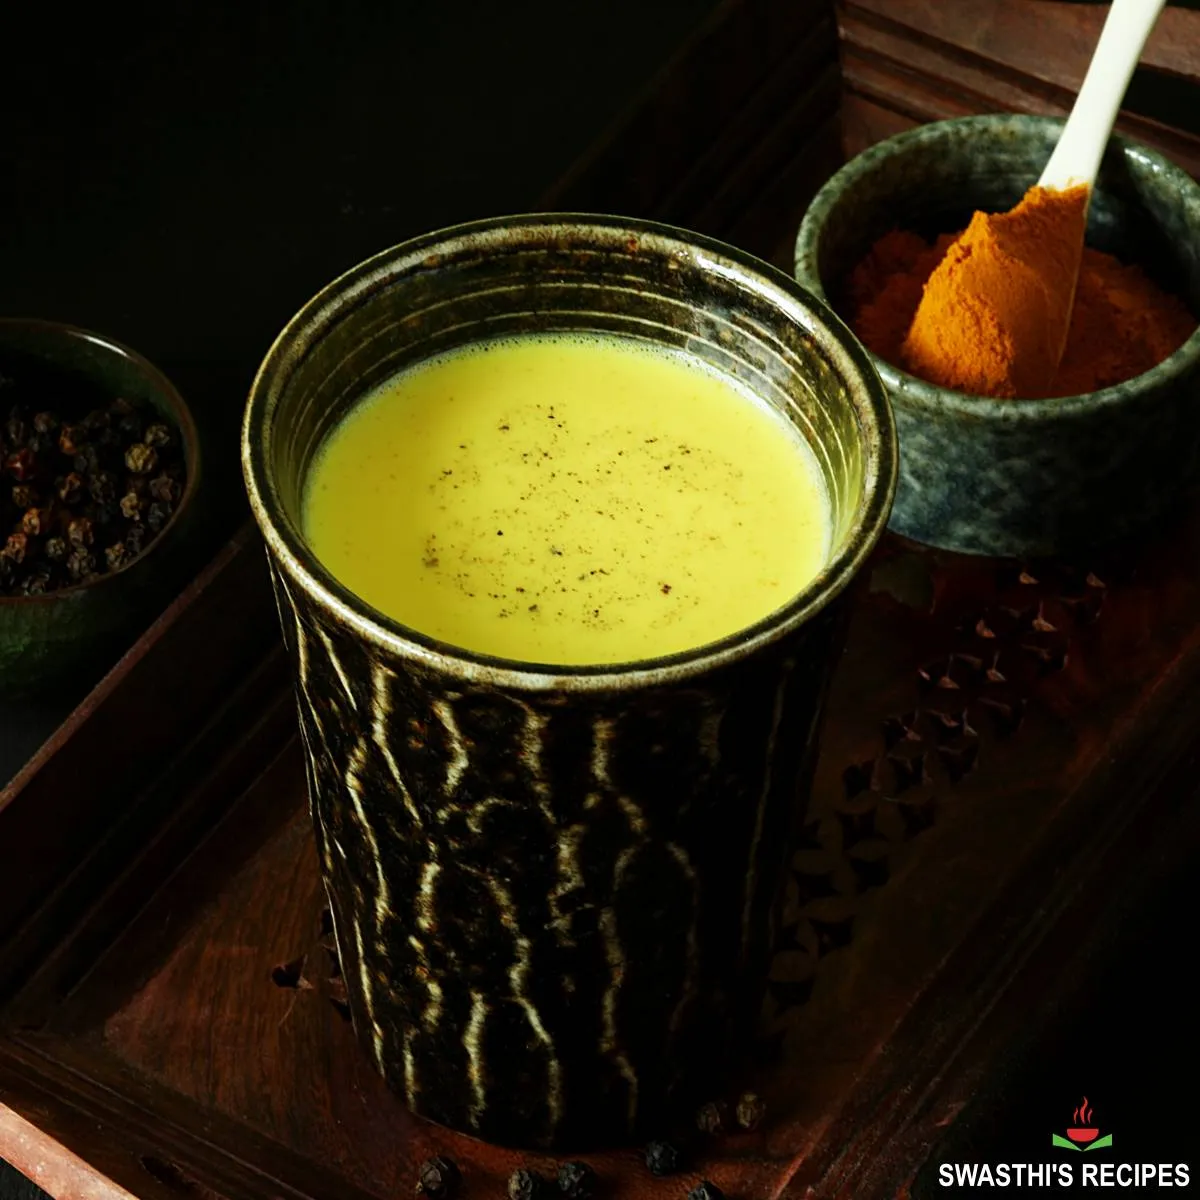 Turmeric milk made in traditional way